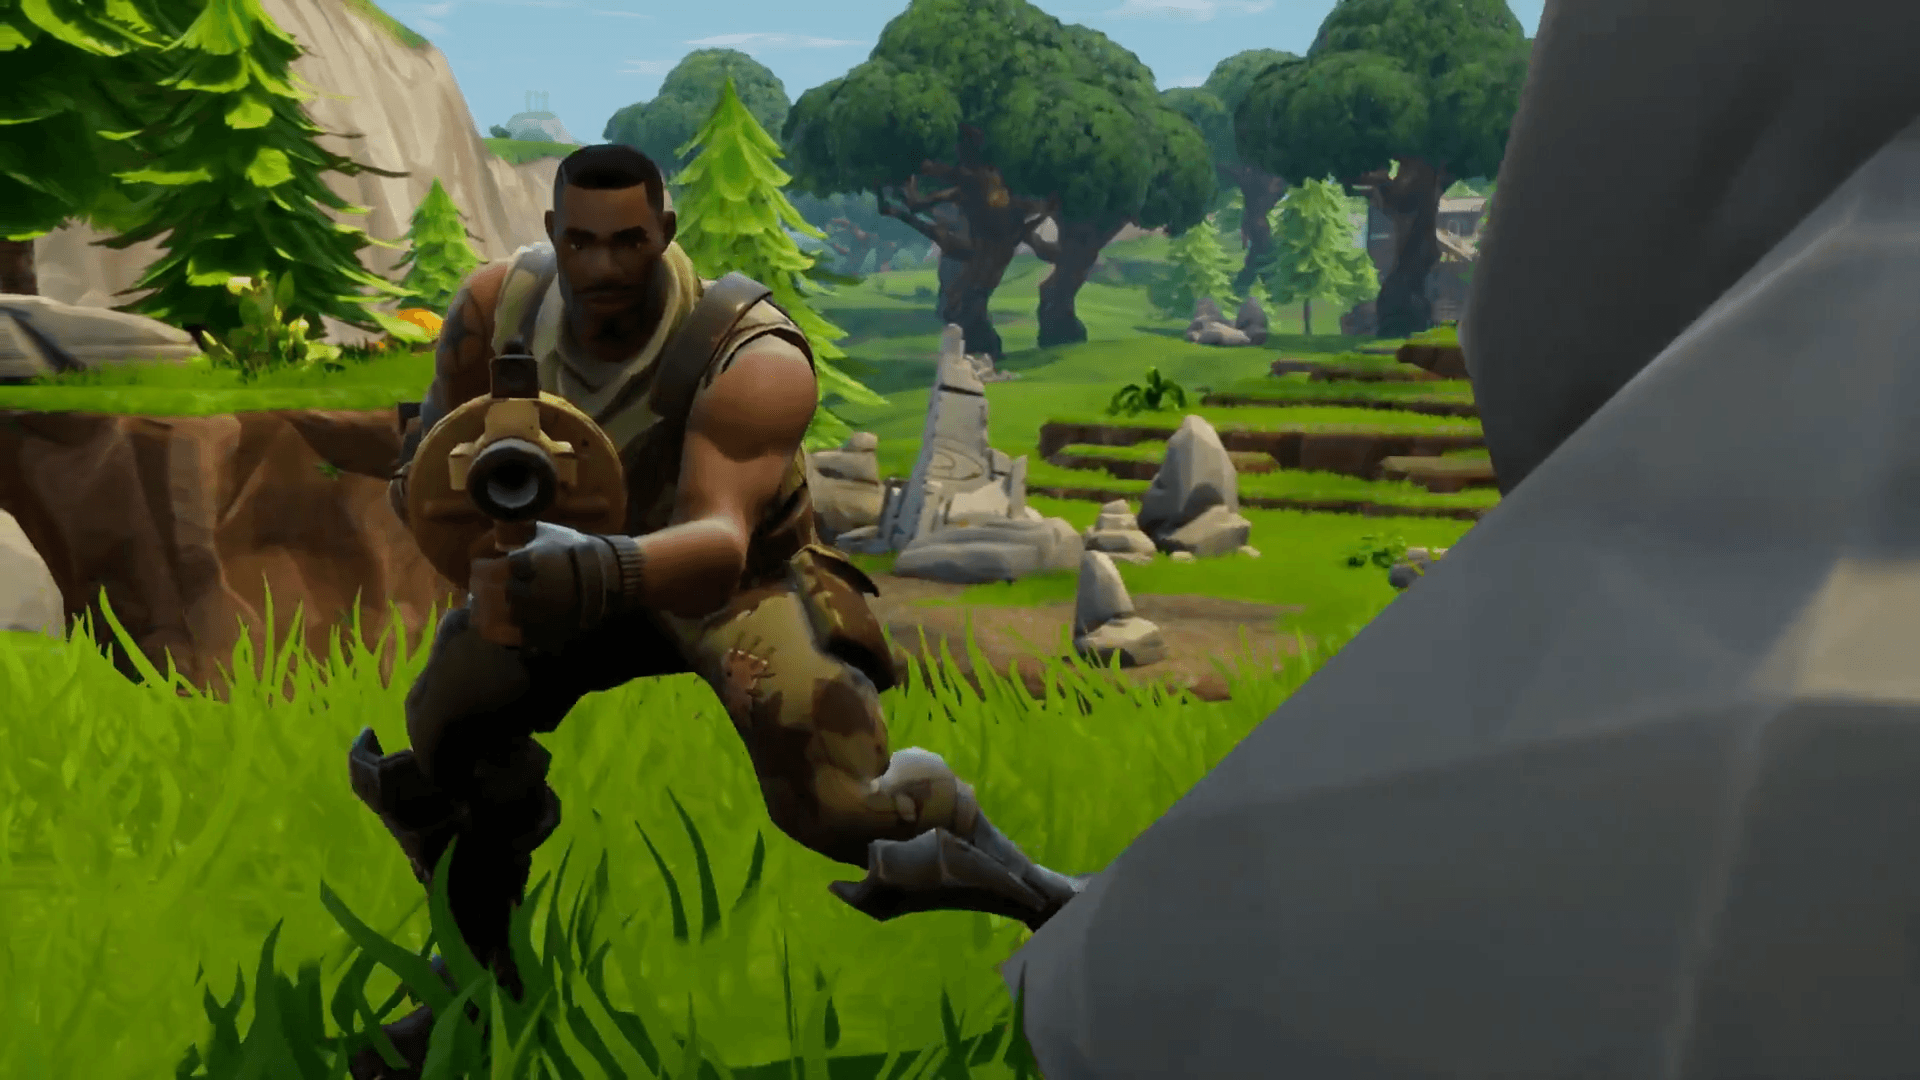 Fortnite: Battle Royale's New Limited Time Mode, Shooting Test, Is